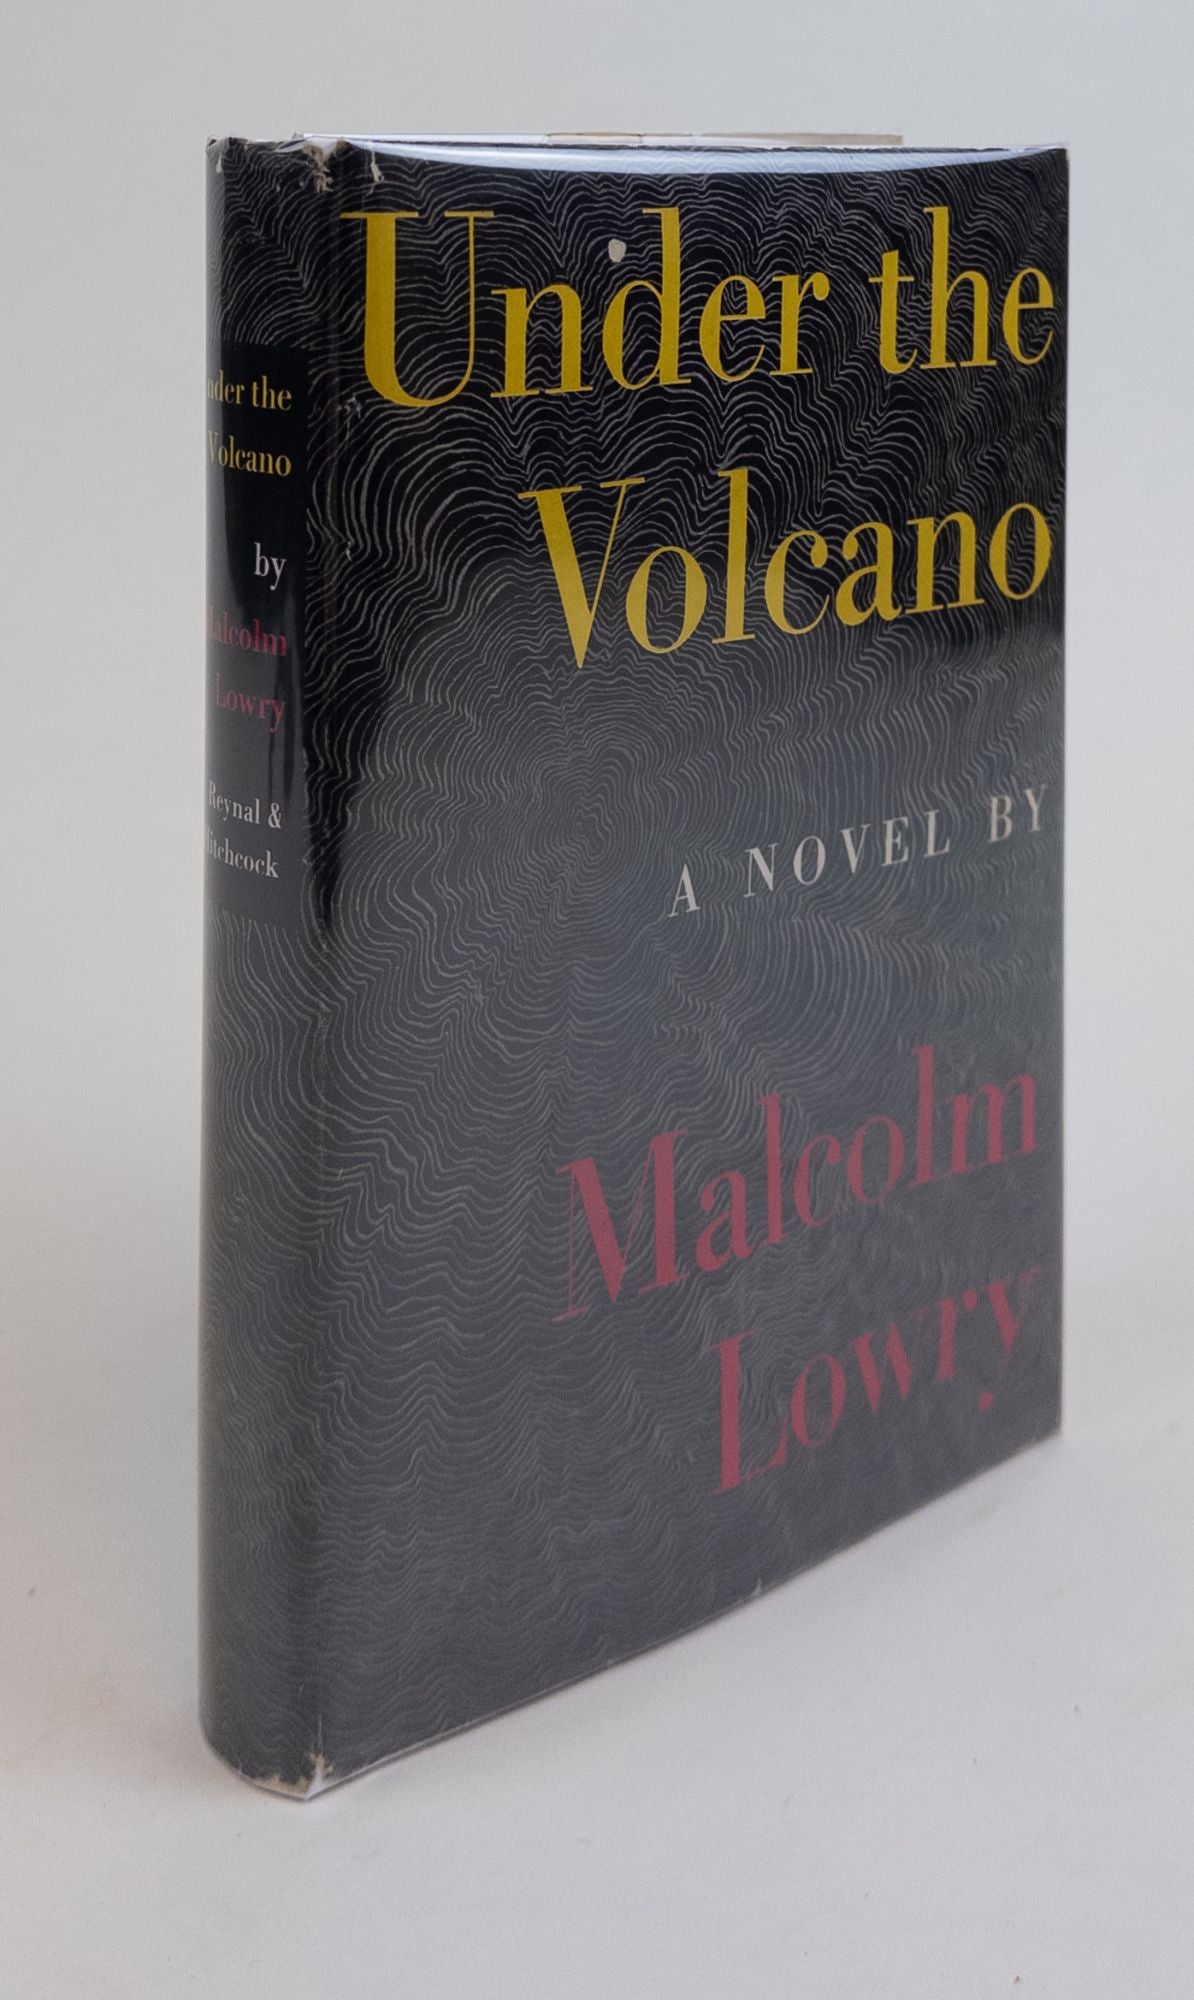 Product Image for UNDER THE VOLCANO